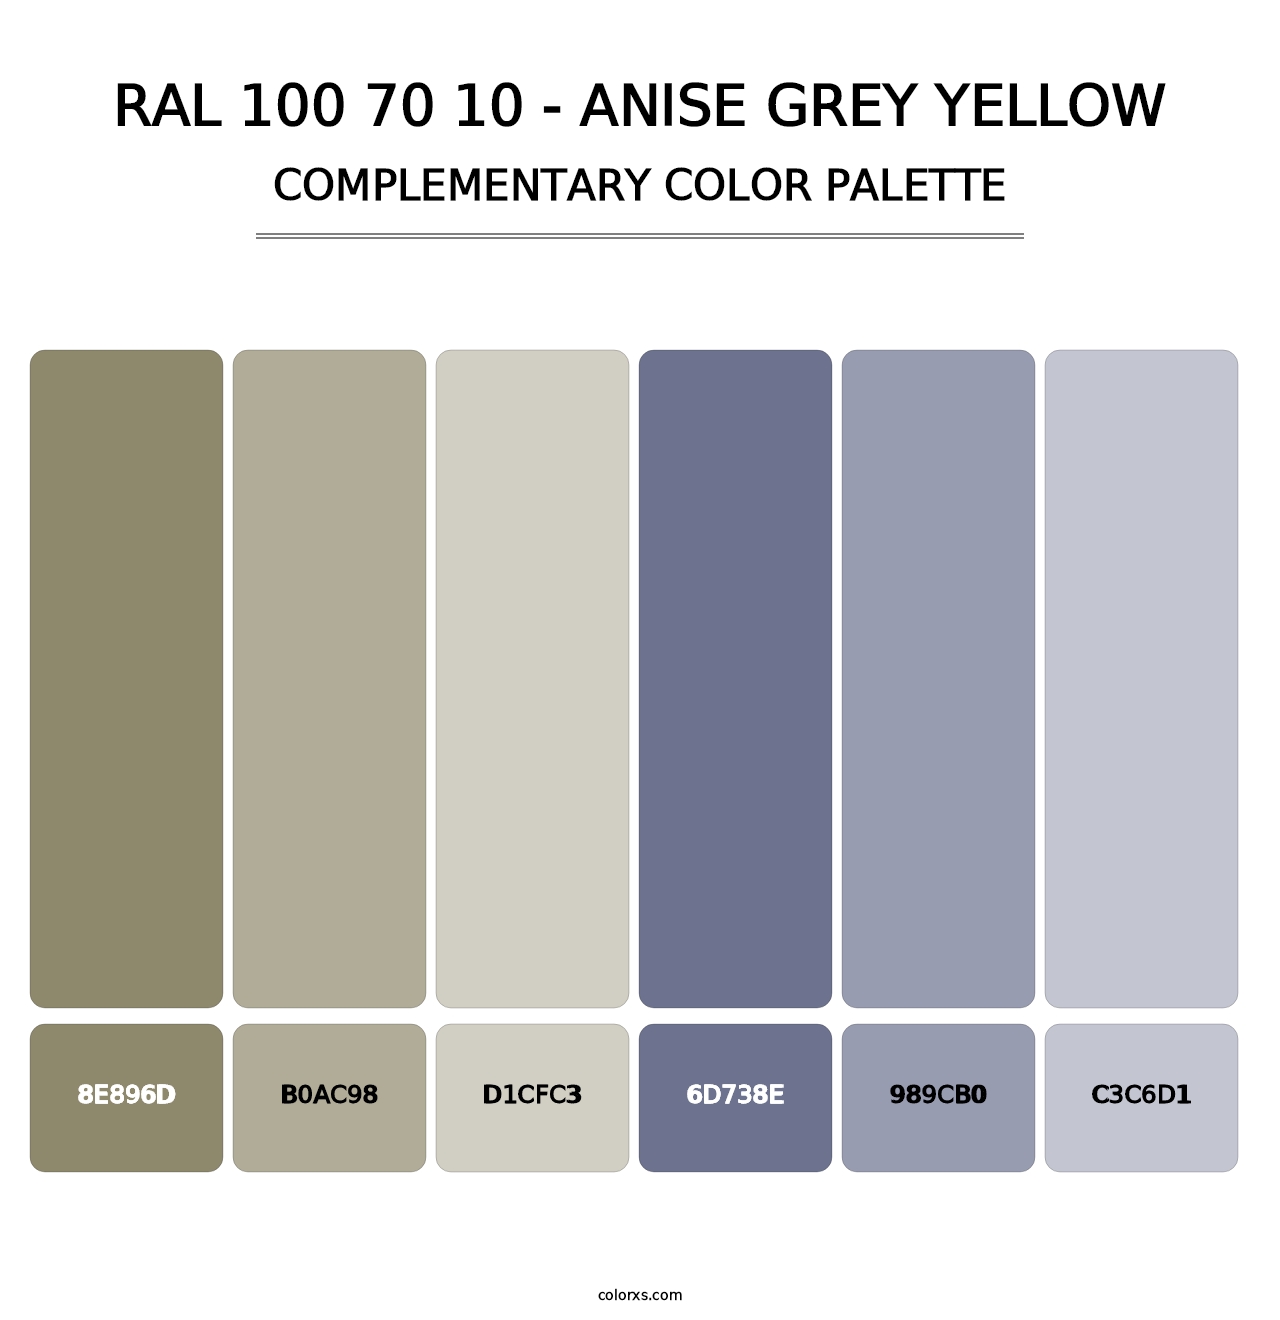 RAL 100 70 10 - Anise Grey Yellow - Complementary Color Palette